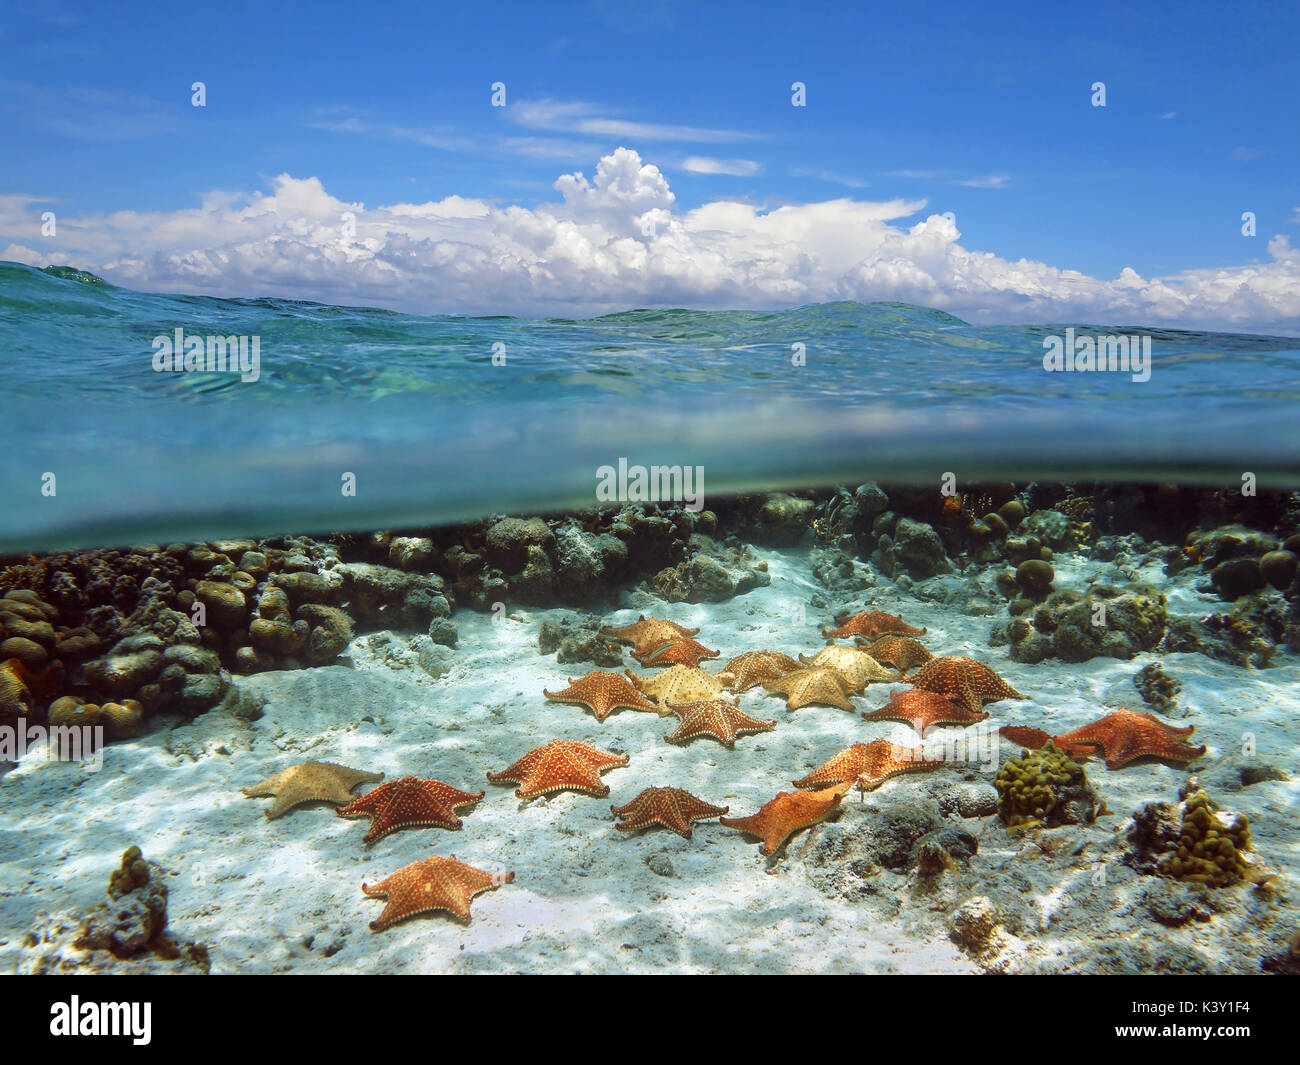 Split view in the ocean with group of starfish underwater and above surface, blue sky with cloud Stock Photo